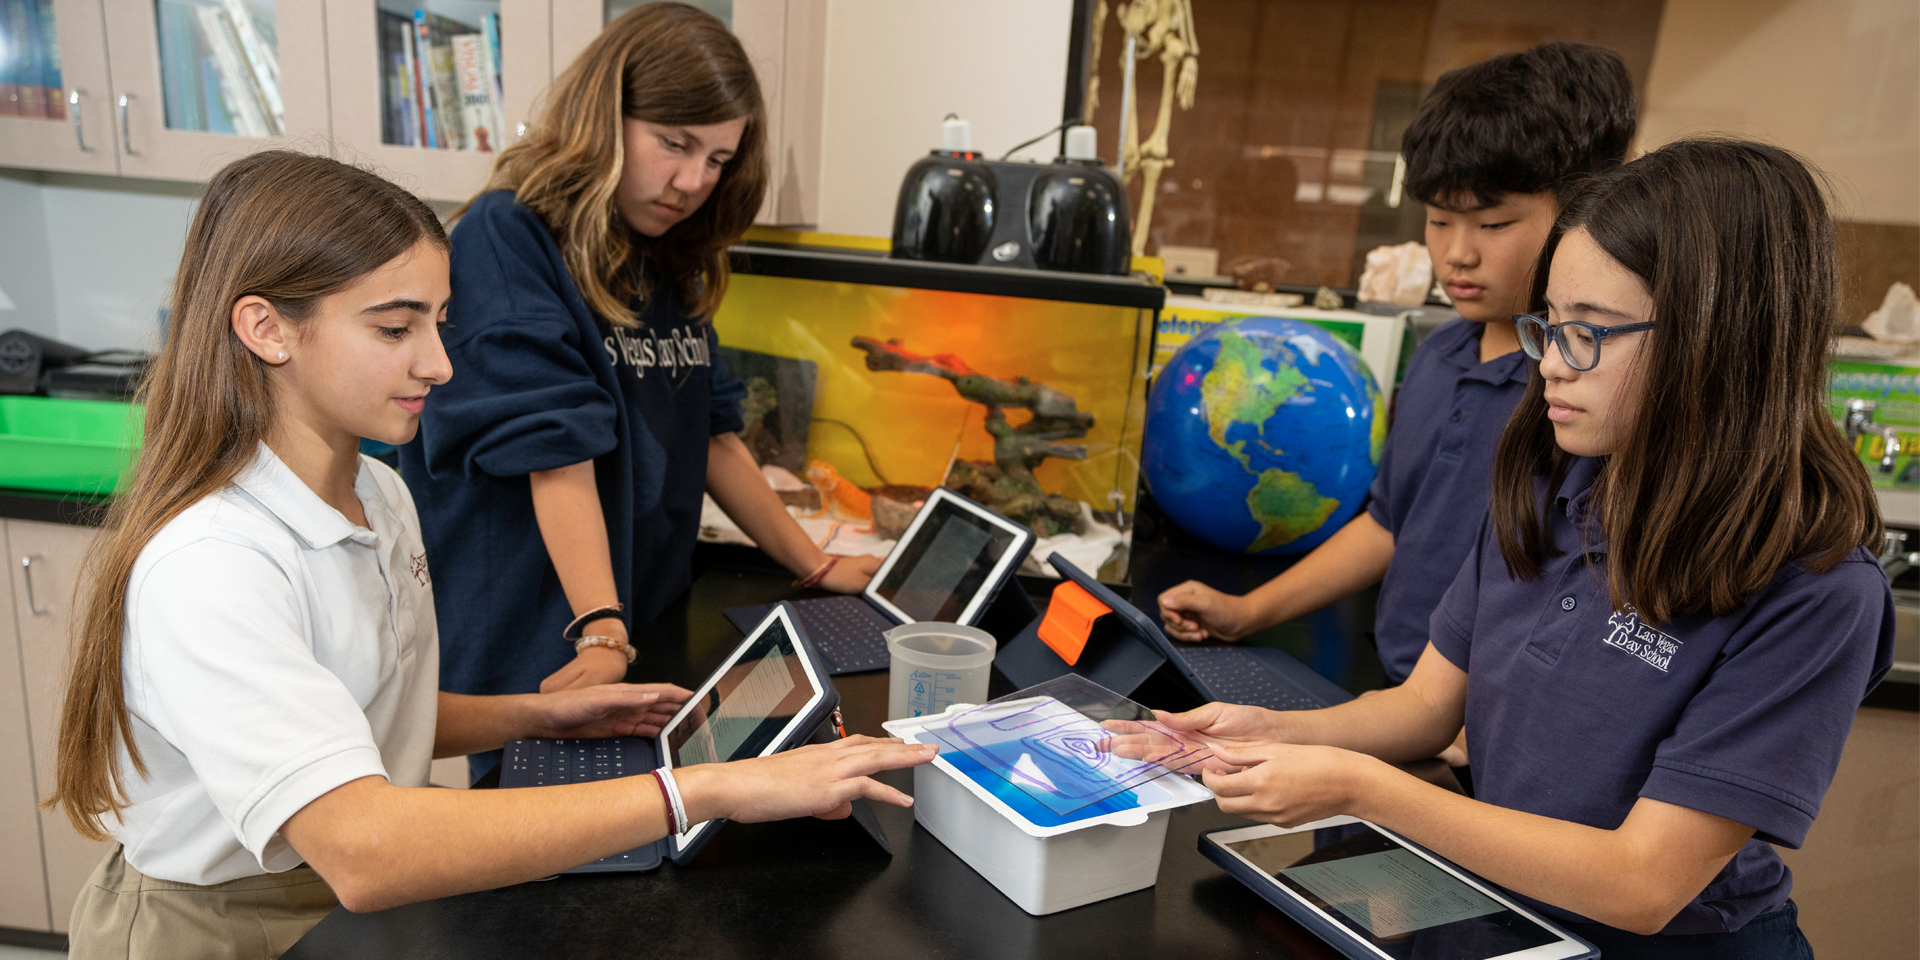 LVDS students with tablet in lab setting